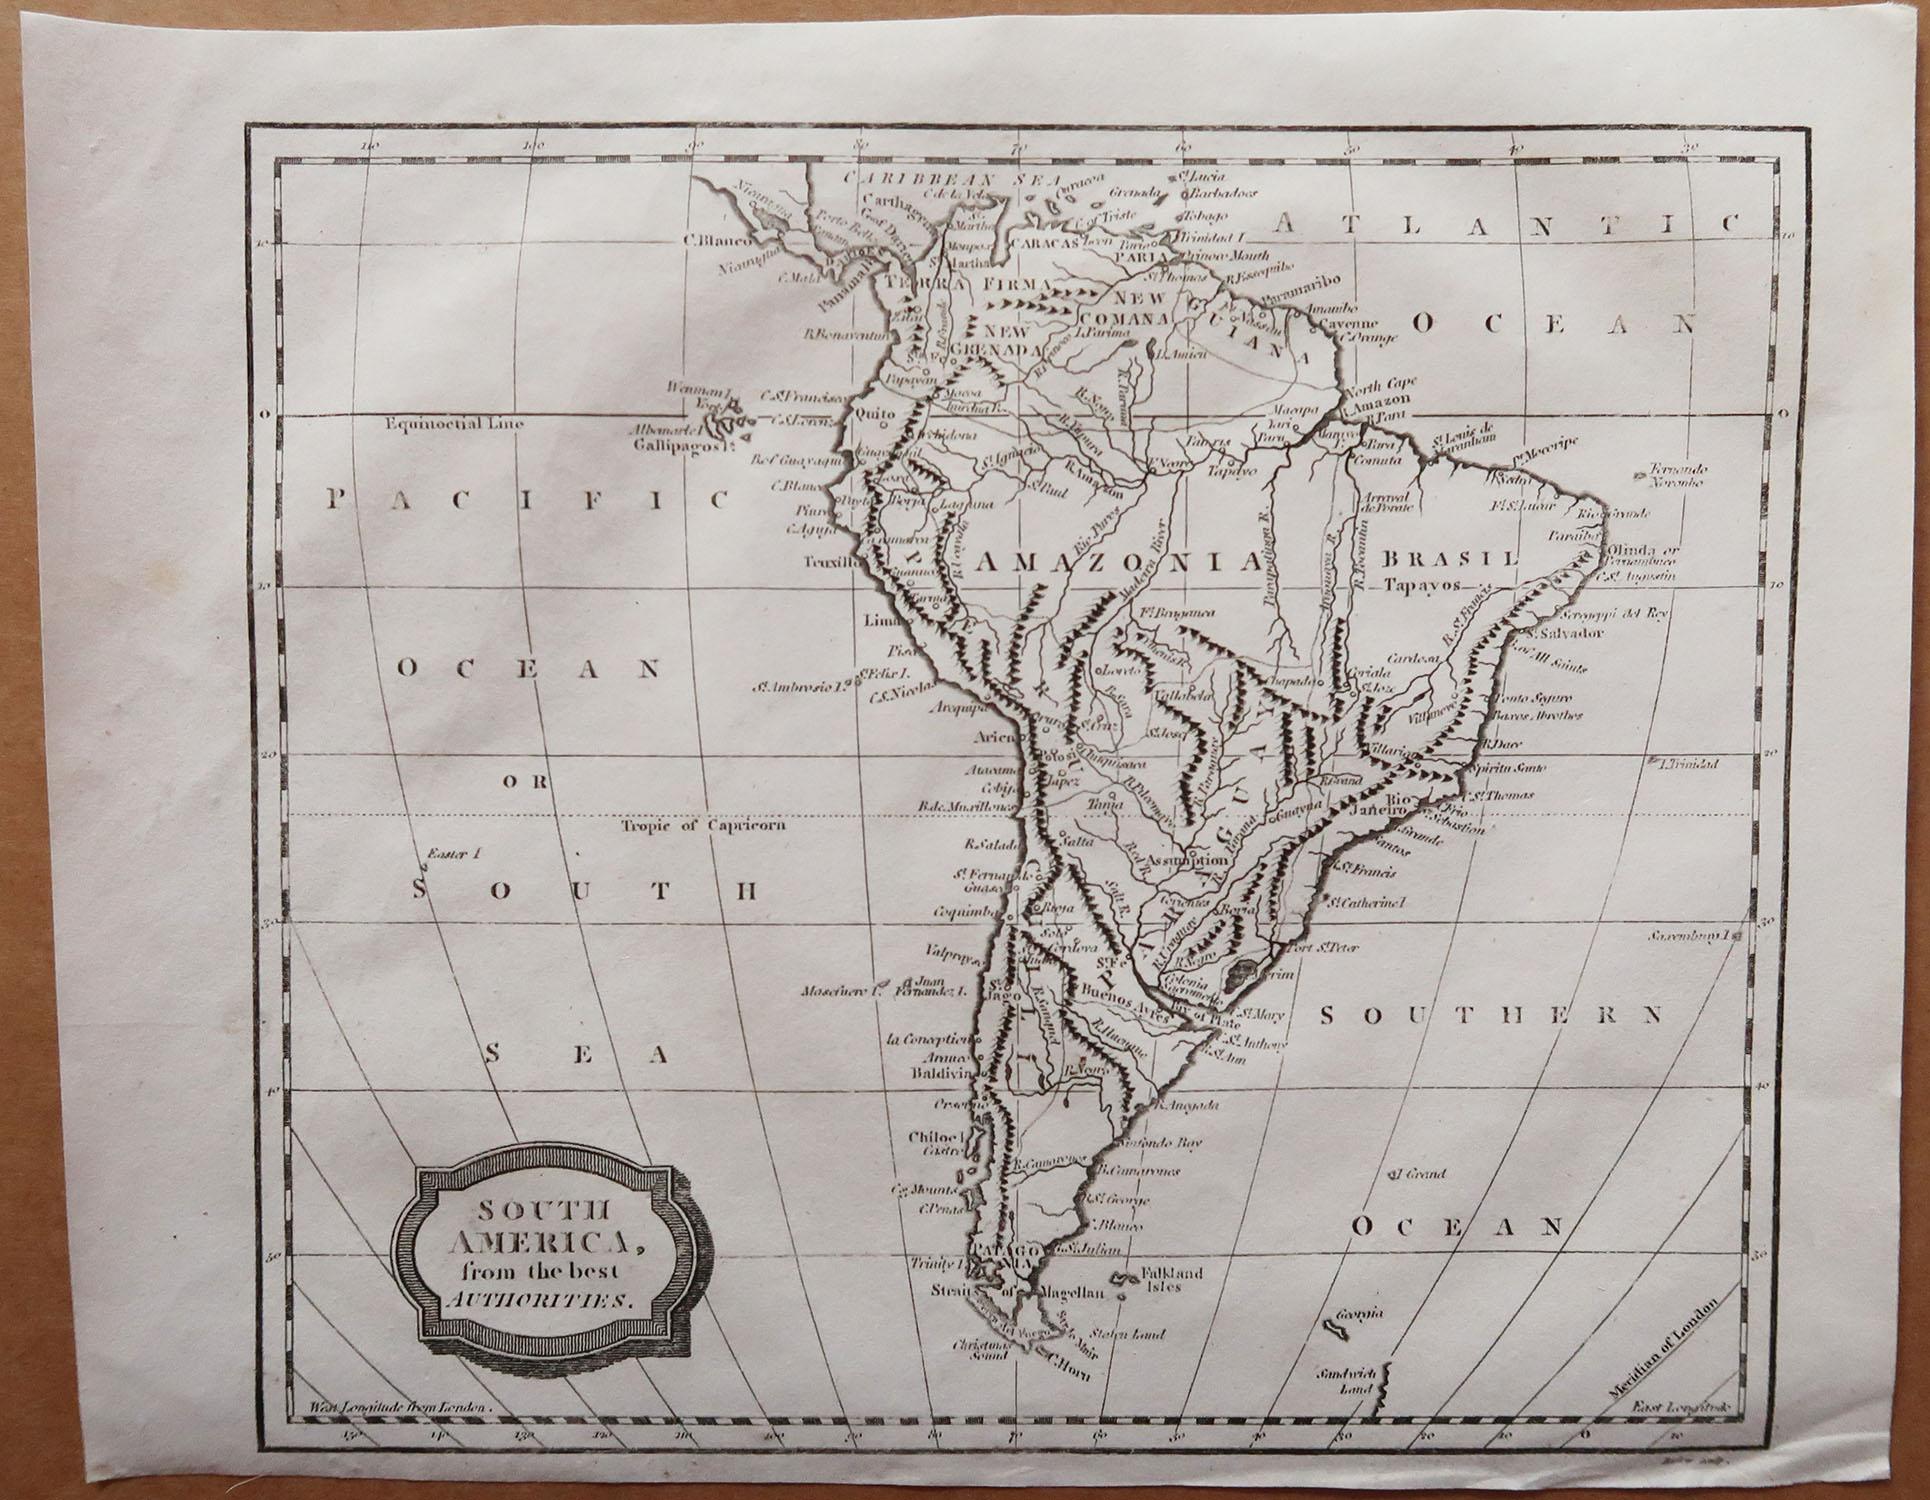 English Original Antique Map of South America, Engraved by Barlow, 1806